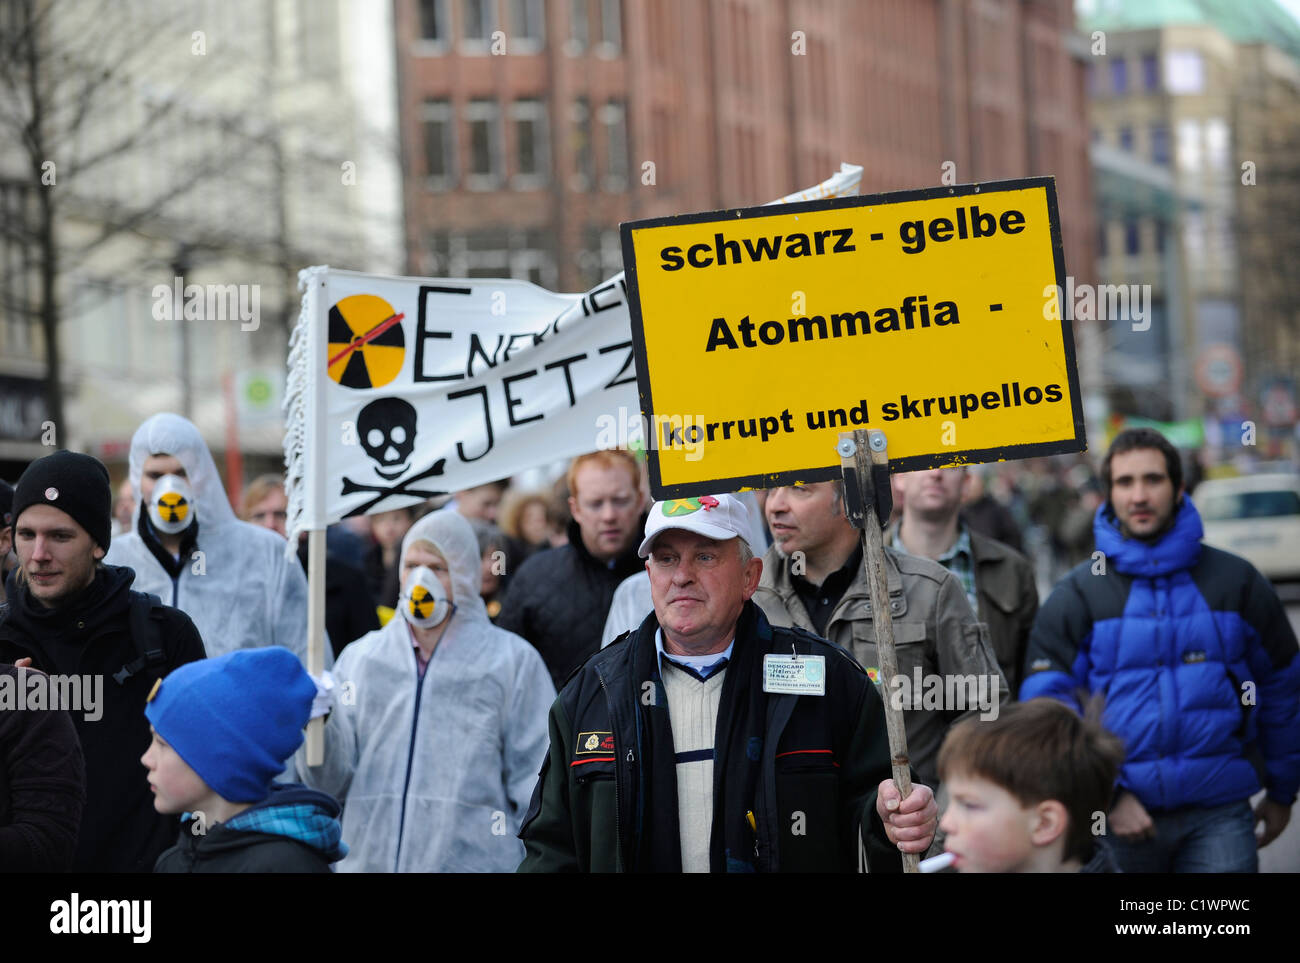 GERMANY Hamburg 2011 march 26 , large rally and public meeting at townhall market against nuclear power after accident Fukushima Stock Photo